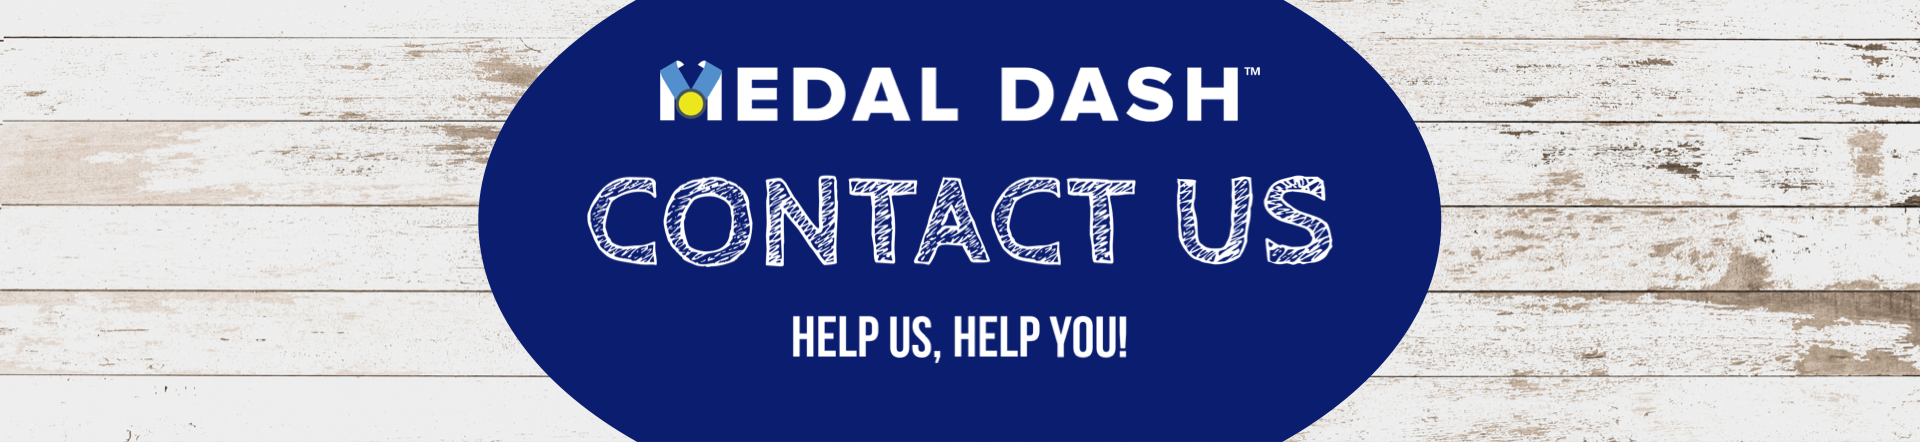 medal dash contact us page - help us, help you